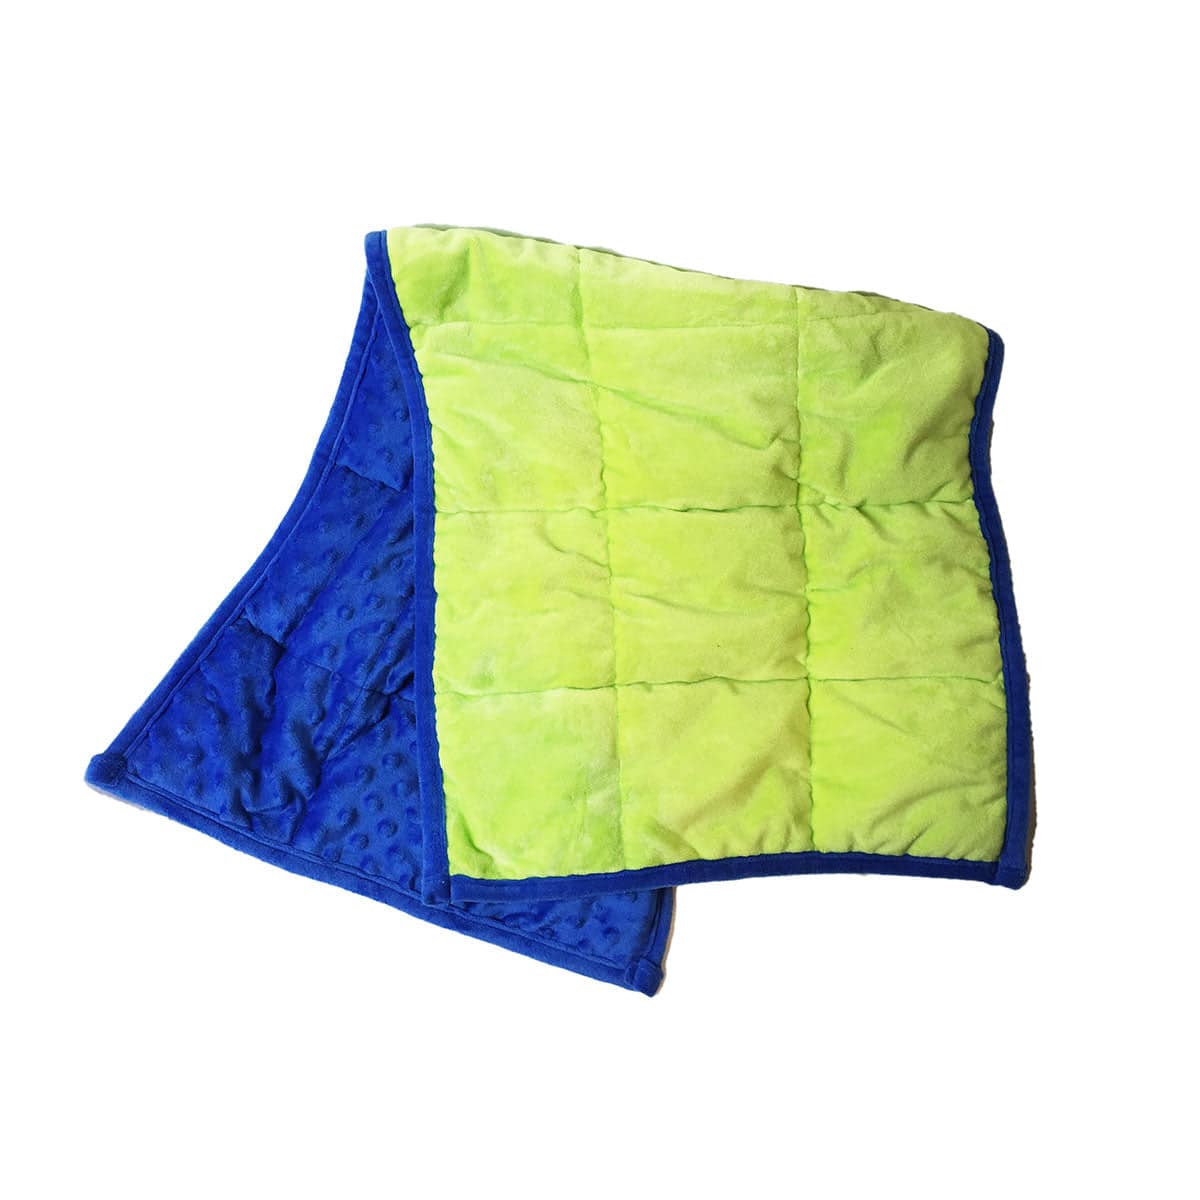 BetterLiving Weighted Lap Pad